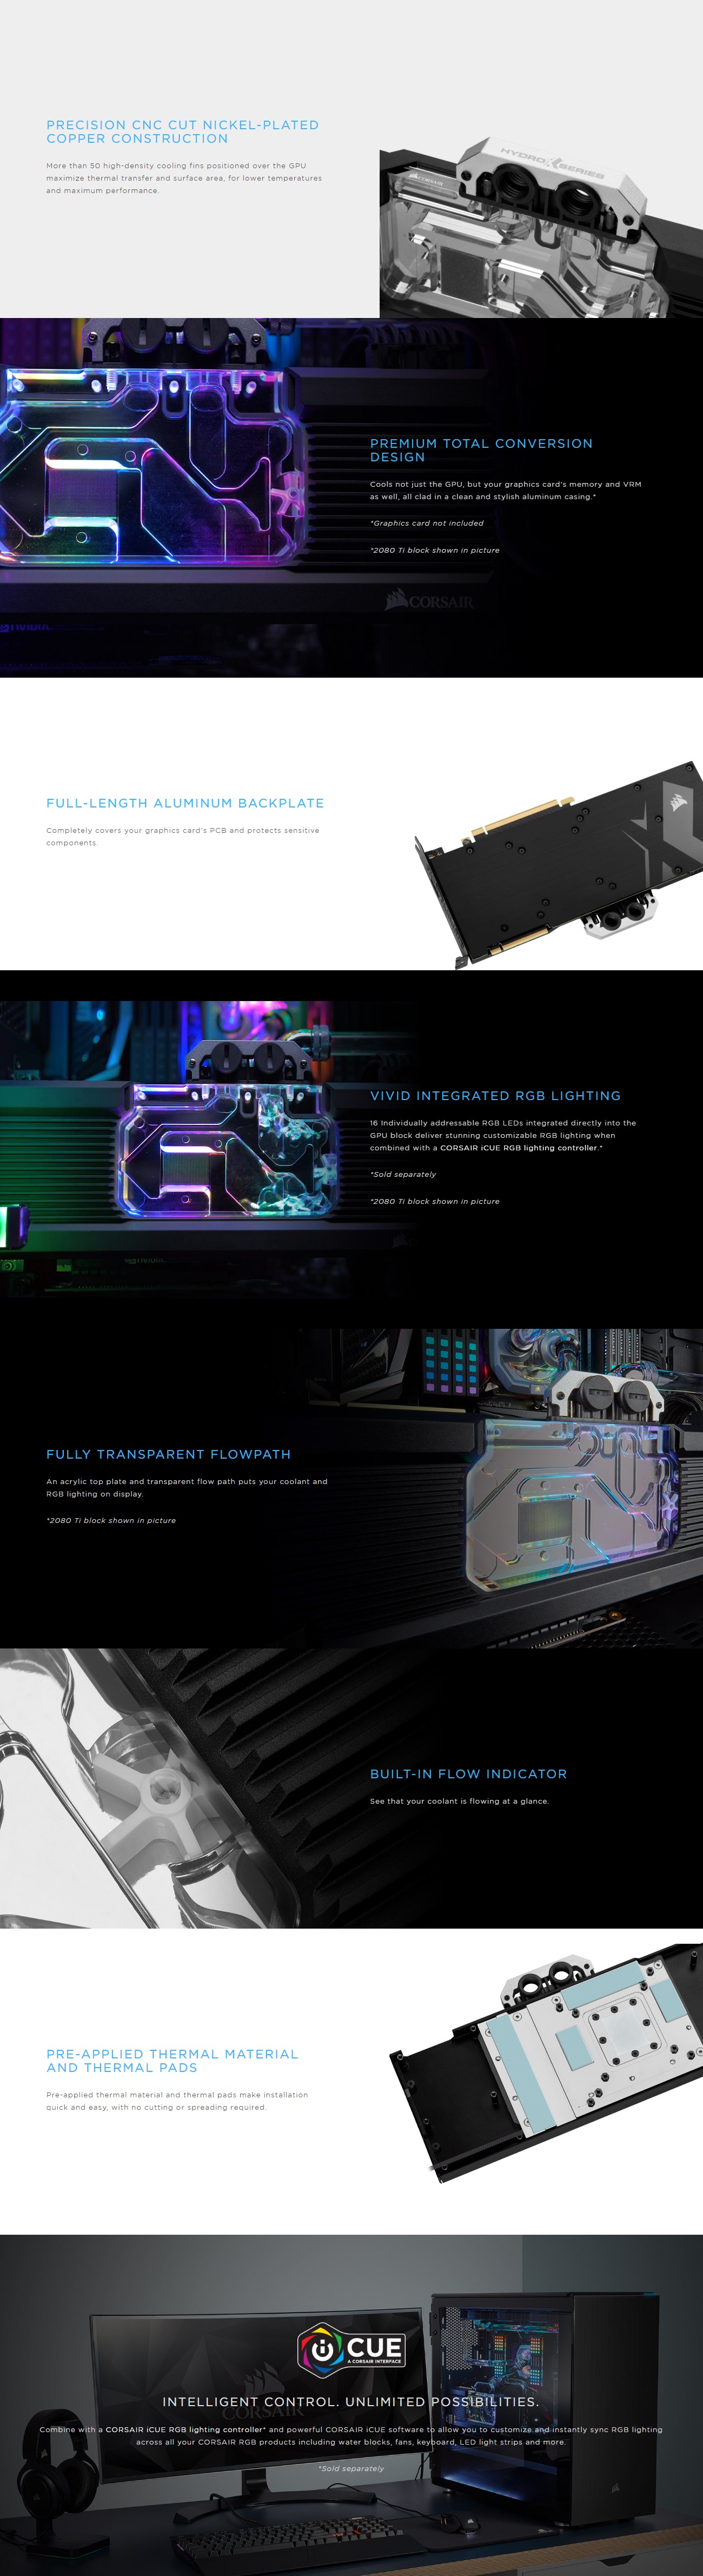 A large marketing image providing additional information about the product Corsair Hydro X Series XG7 RGB (2070 FE) GPU Waterblock - Additional alt info not provided